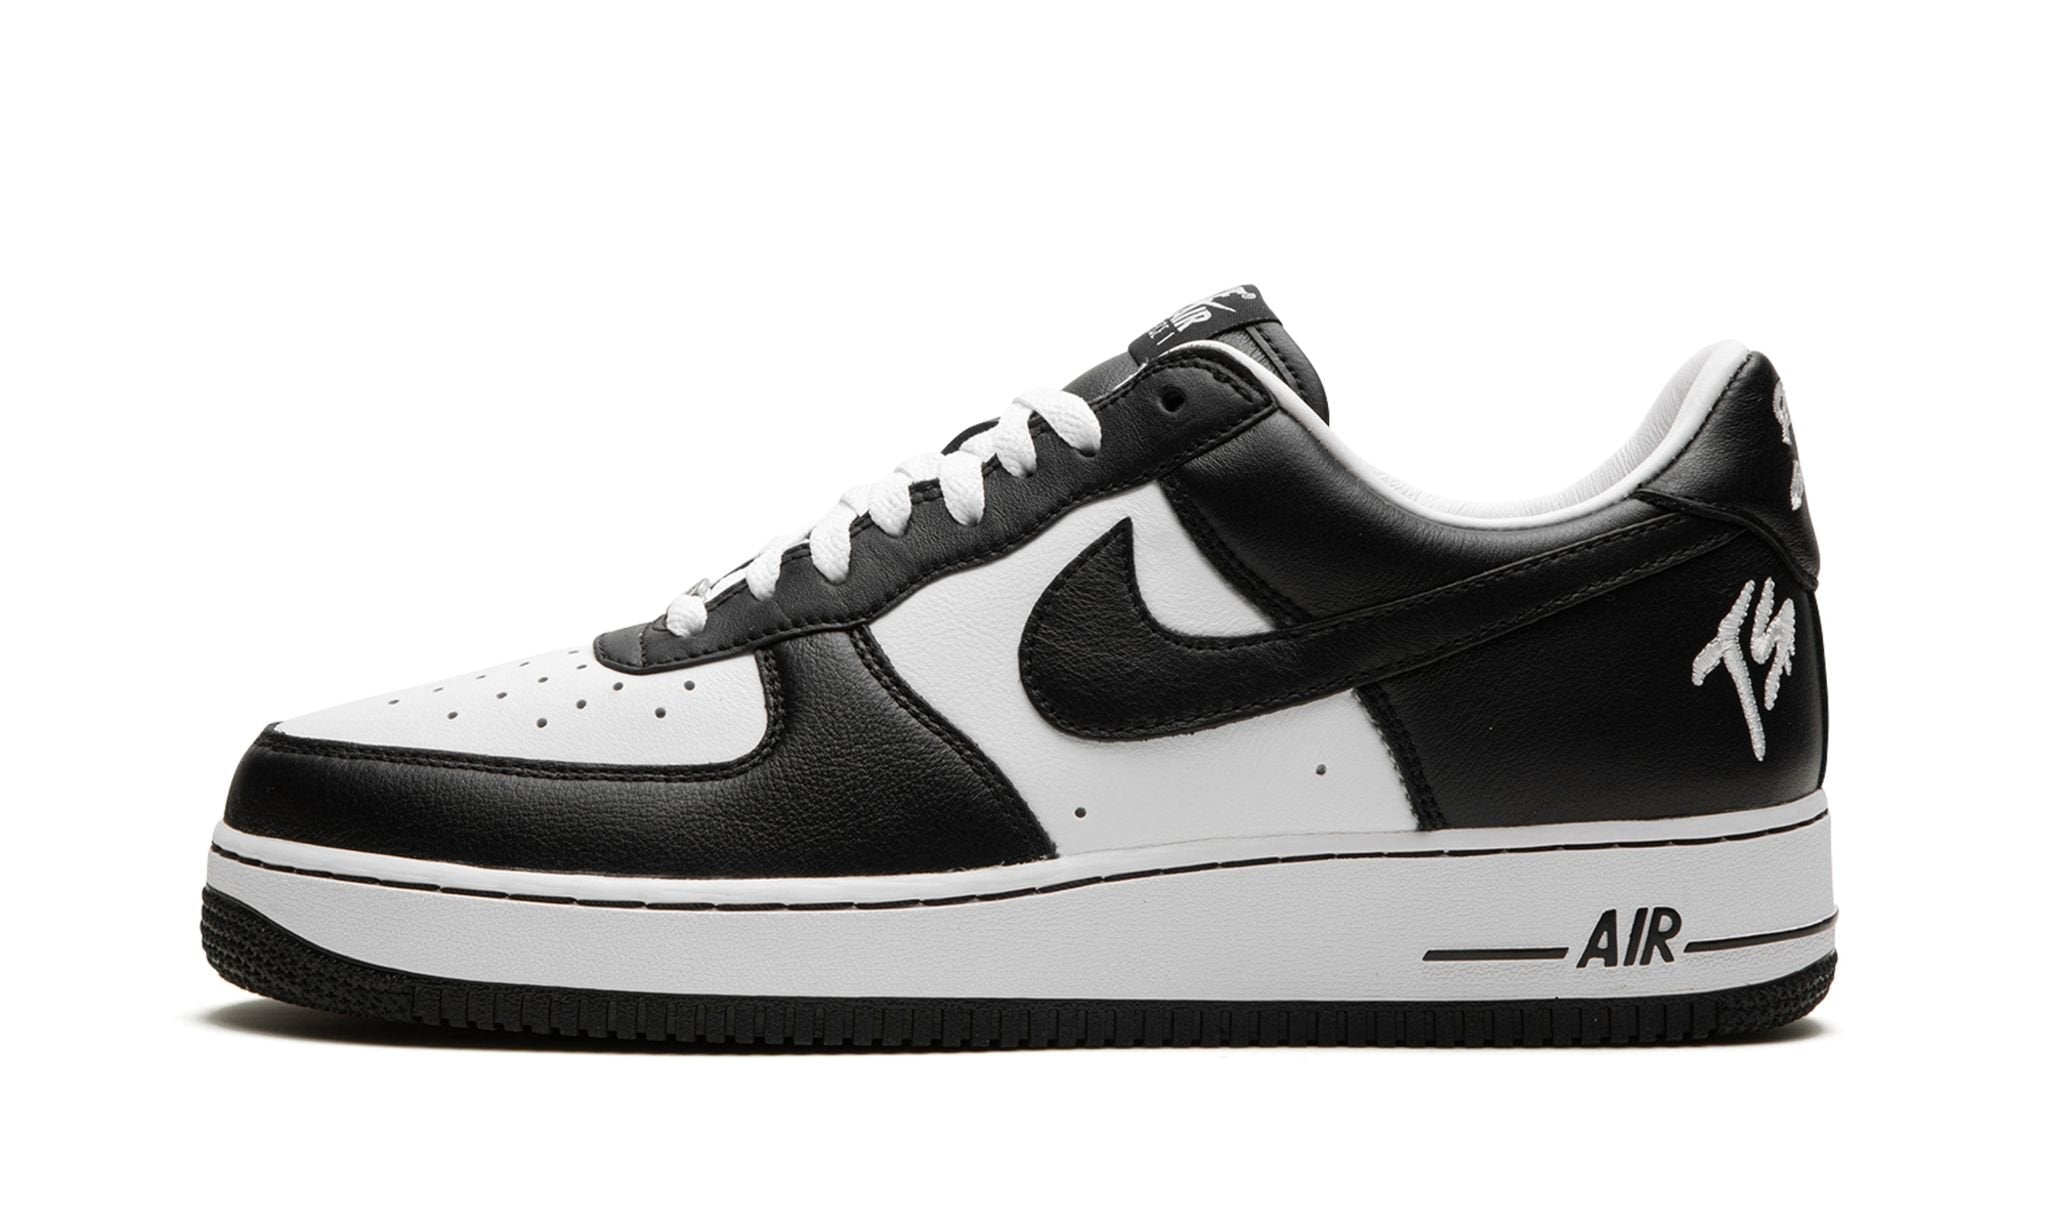 Nike Air Force 1 Low QS Terror Squad Black White - Addict Sneakers